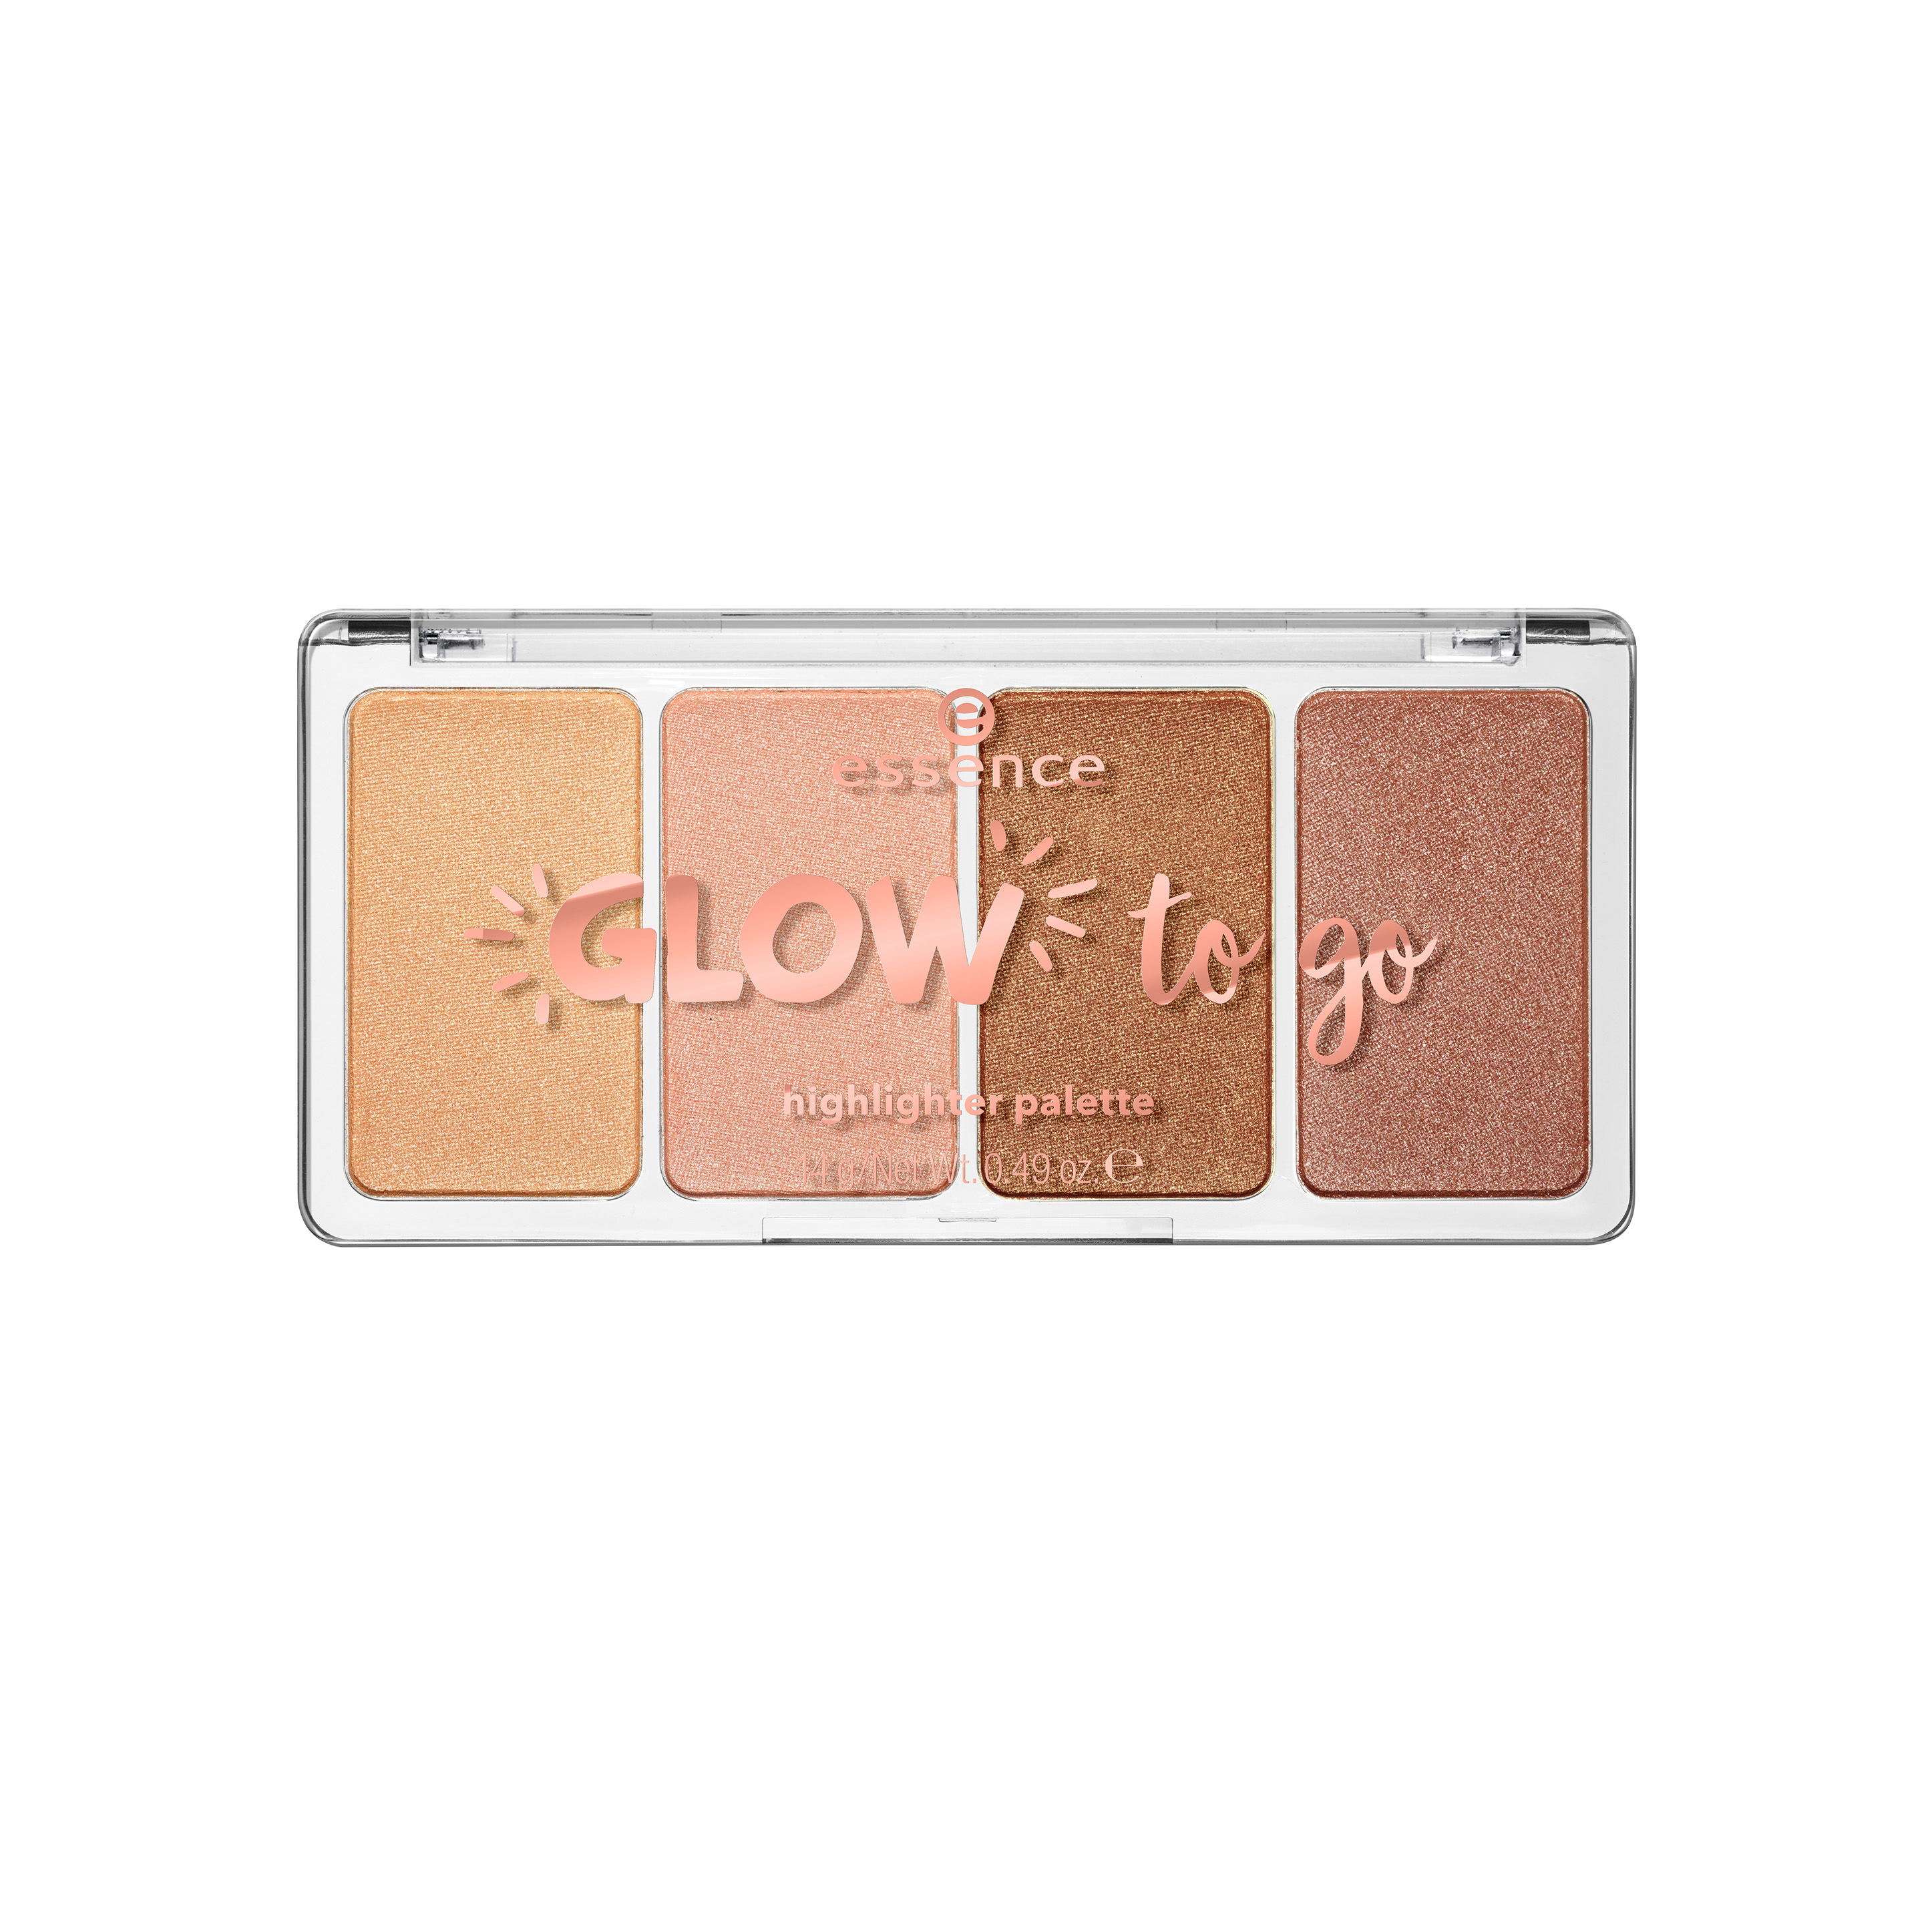 essence glow to go highlighter palette 10